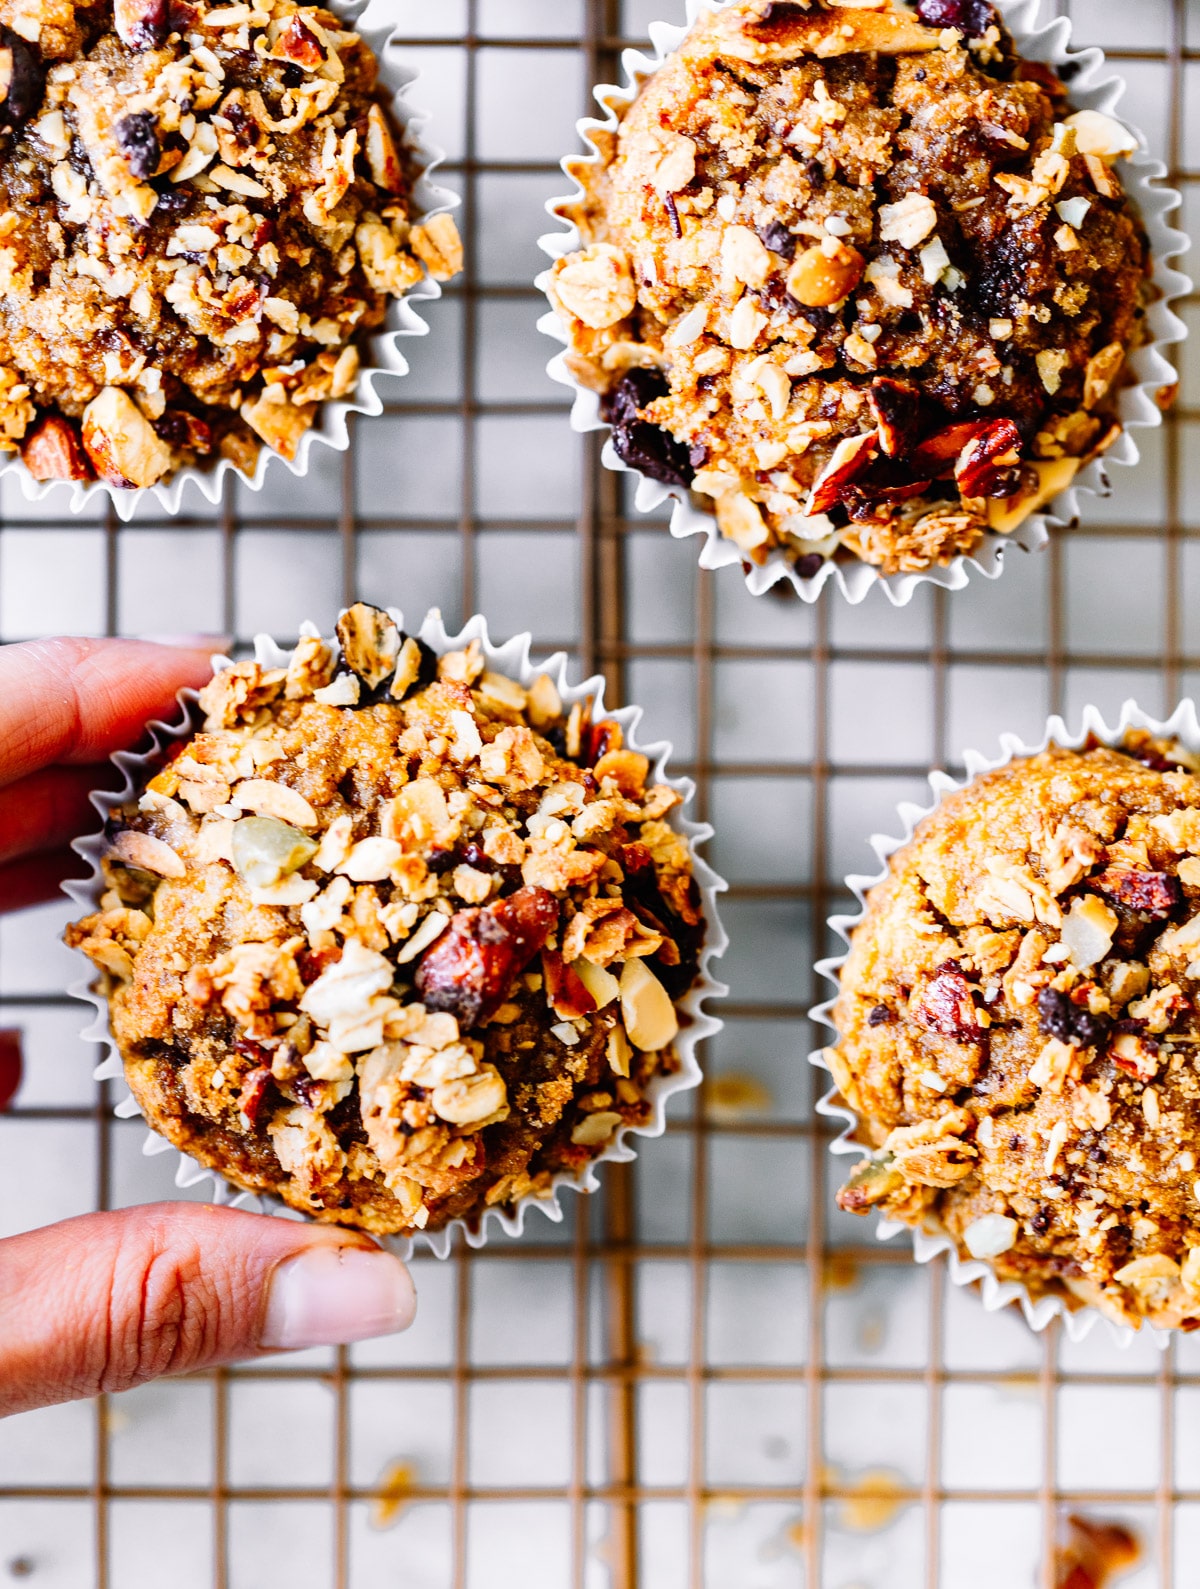 A hand picking up a breakfast muffin topped with muesli from wire cooling rack.